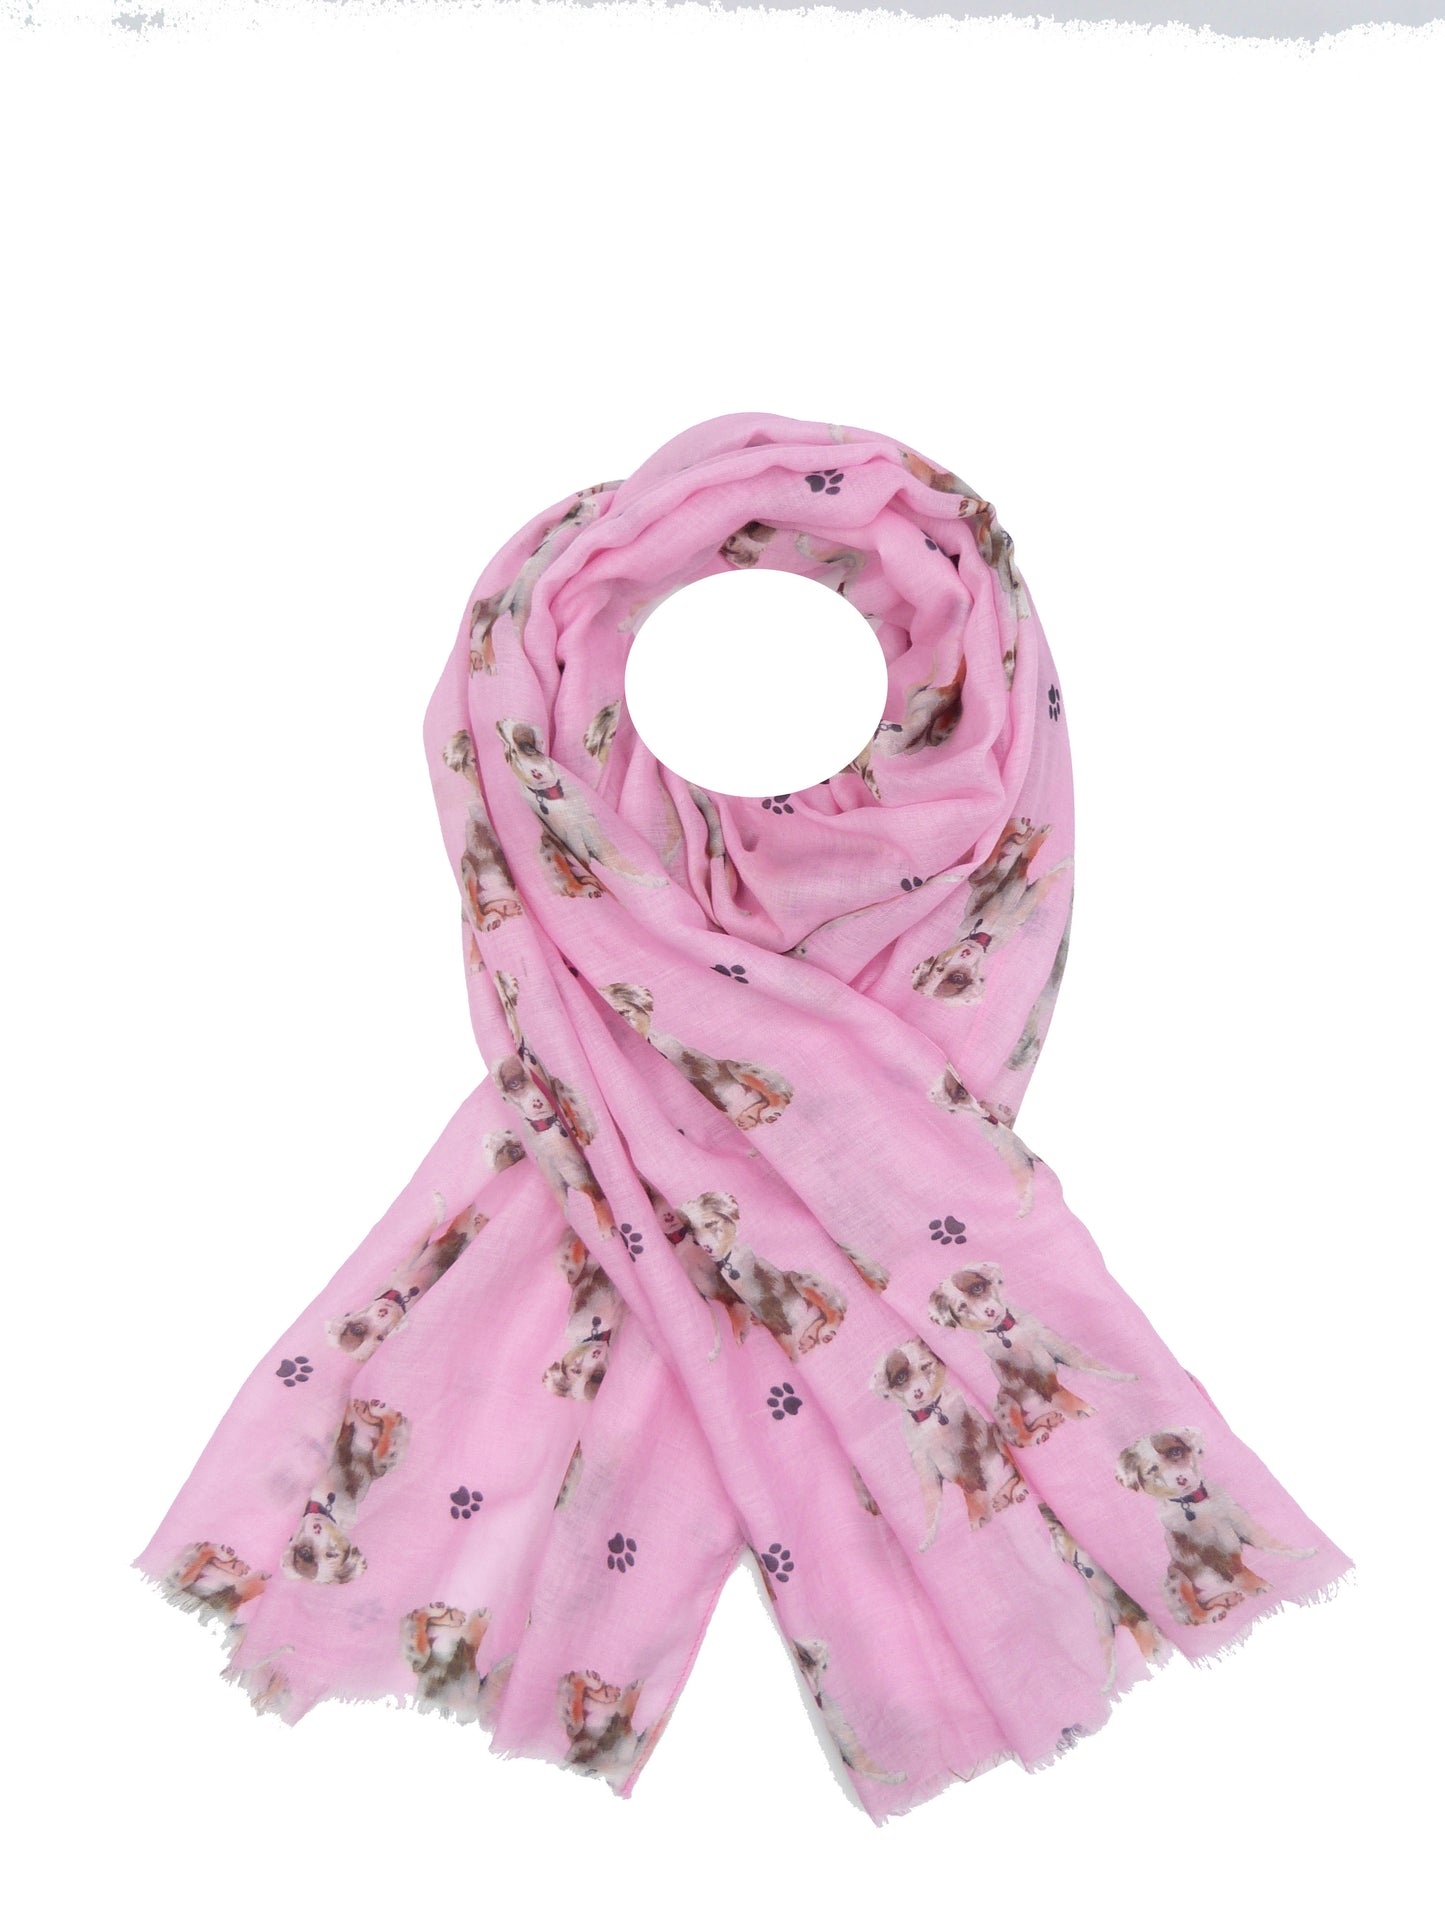 Sheep Dog Print Scarf Come With Free Gift Box